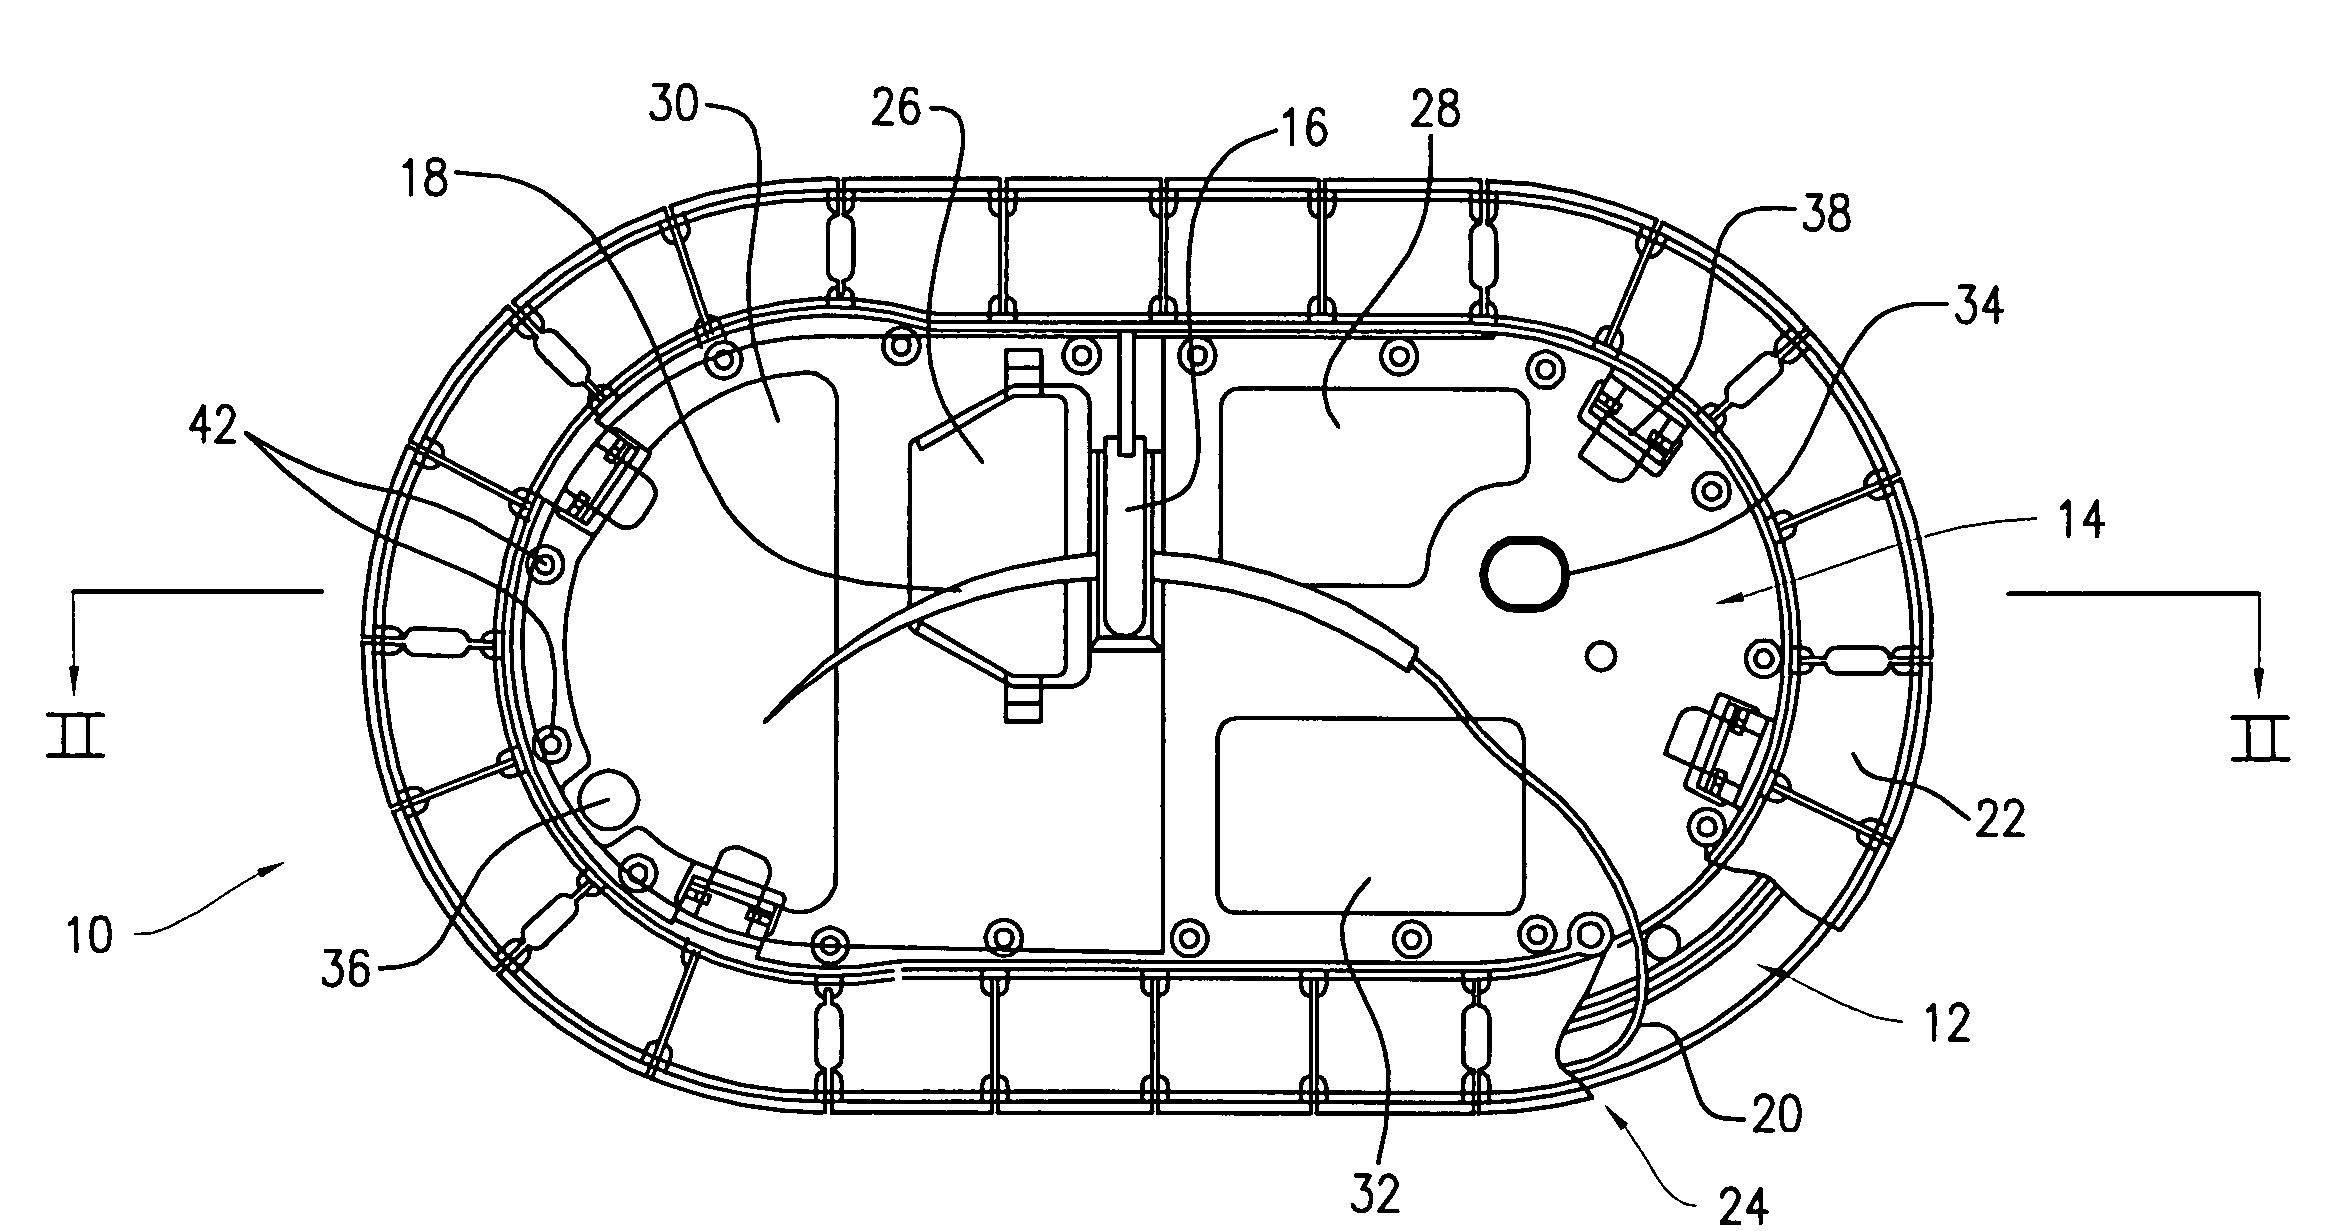 Apparatus and method for making suture packages